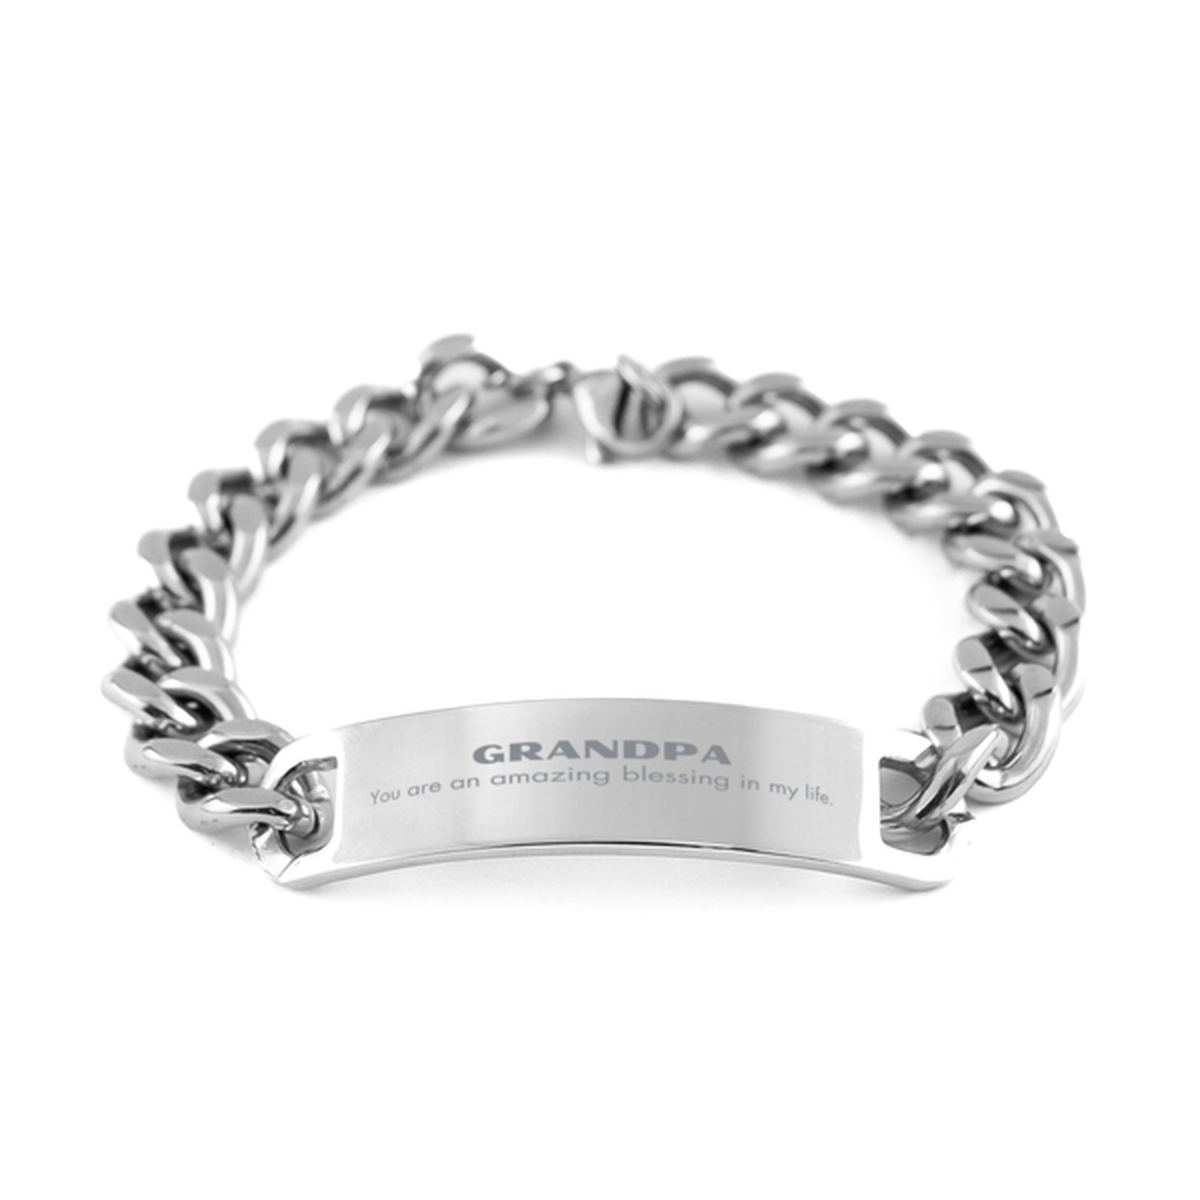 Grandpa Cuban Chain Stainless Steel Bracelet, You are an amazing blessing in my life, Thank You Gifts For Grandpa, Inspirational Birthday Christmas Unique Gifts For Grandpa